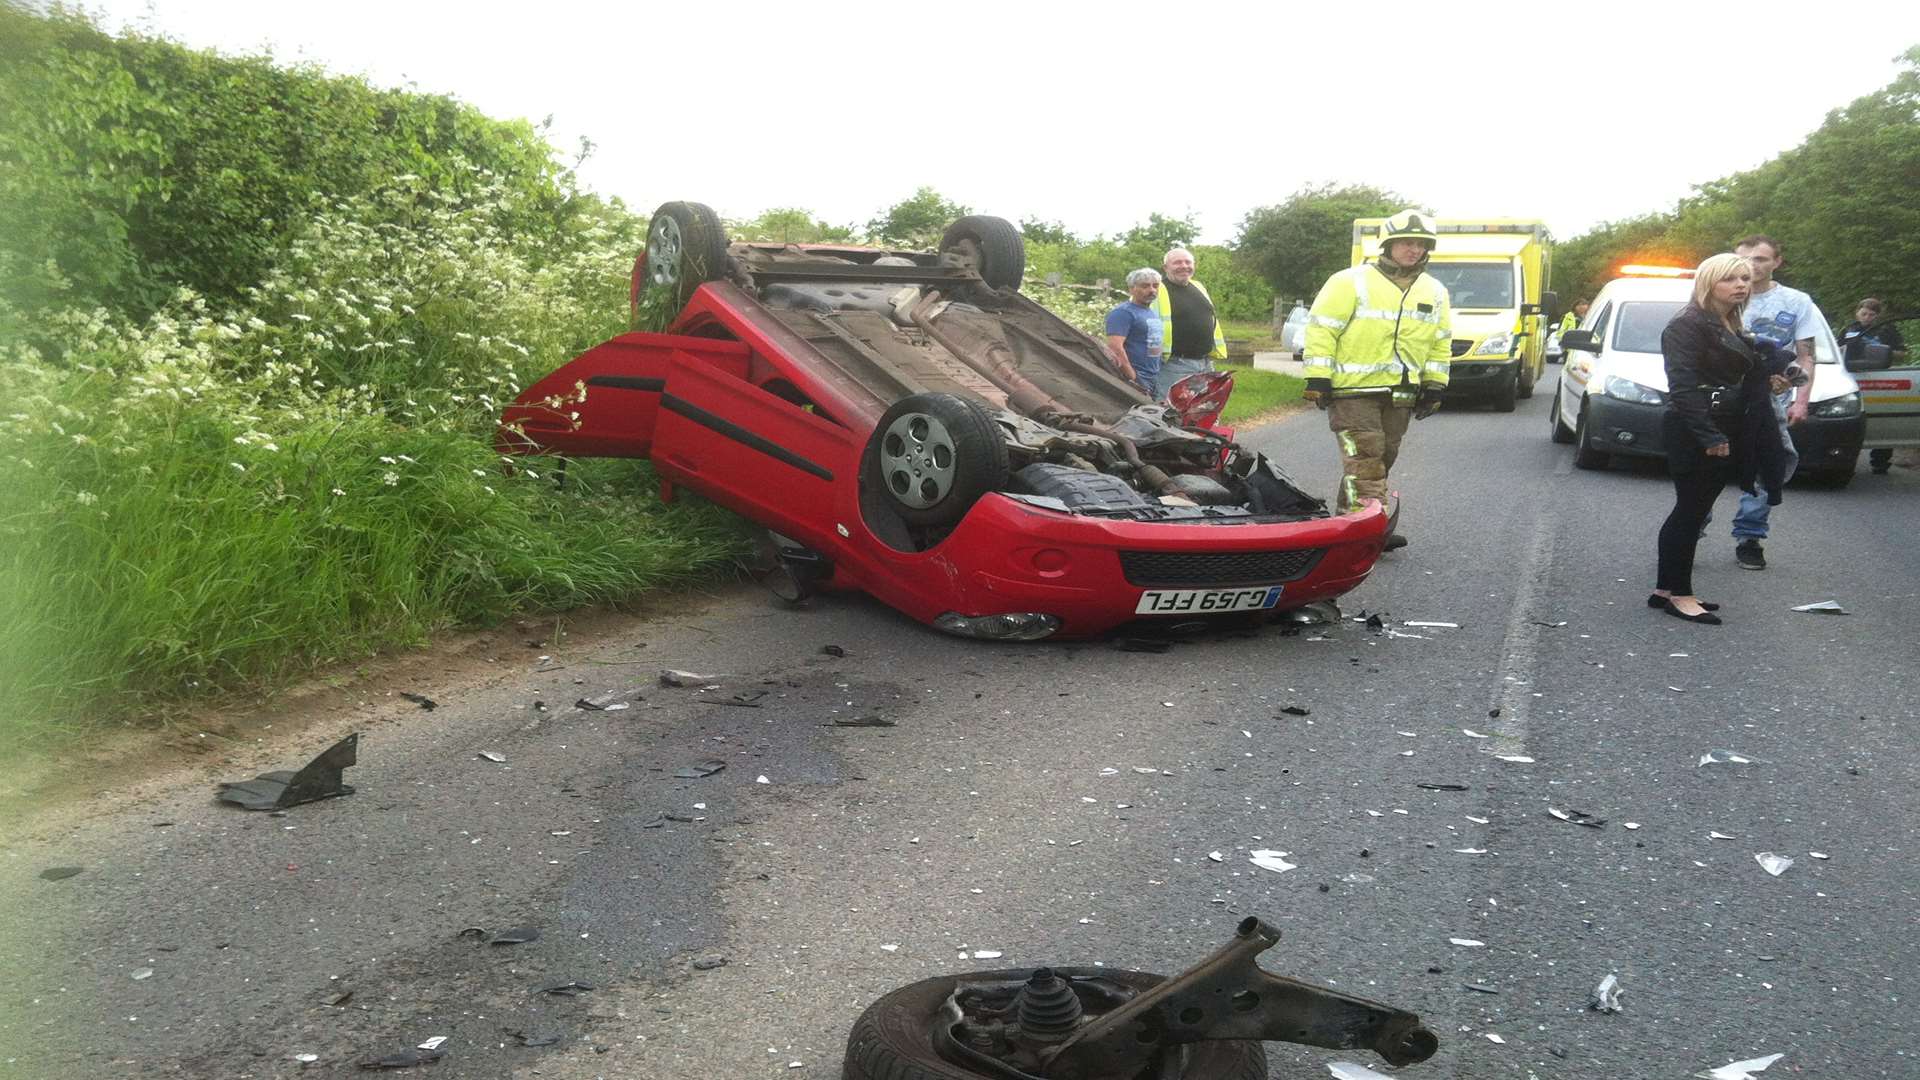 Paul Fox's Kia Picanto after the accident